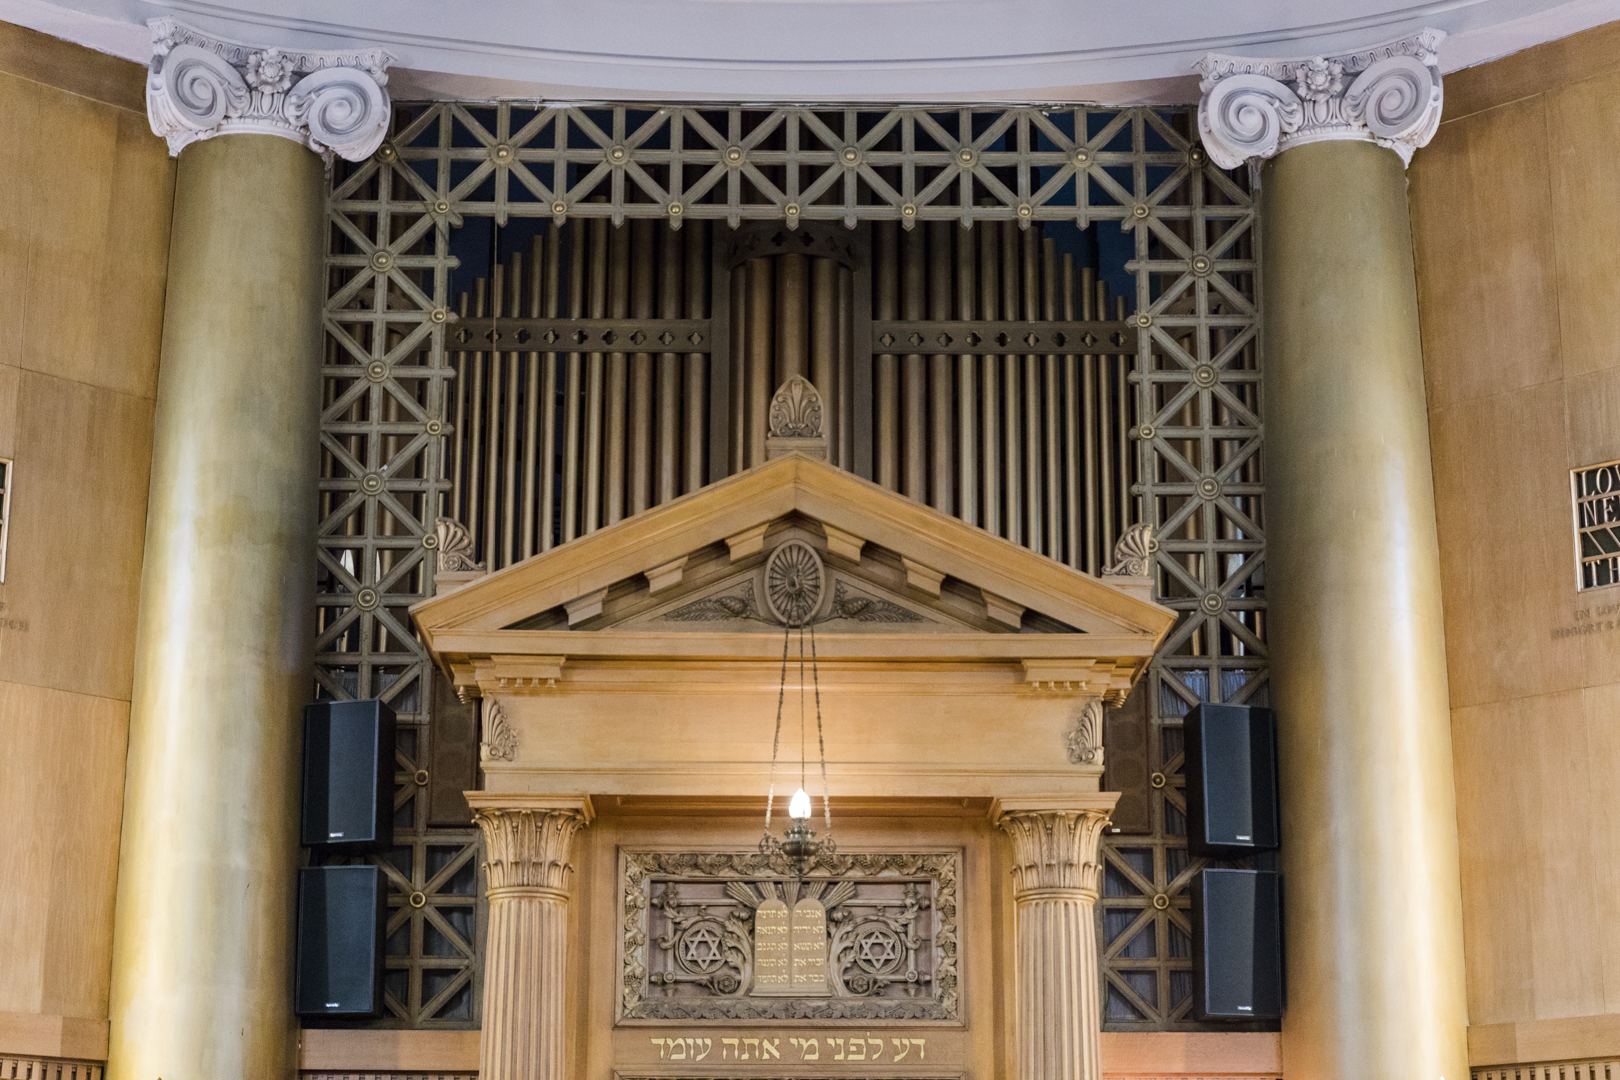 The Midmer-Losh Organ Company instrument from 1929 still hangs at the front of the building even though it is not in working condition. Eagle photo by Paul Frangipane